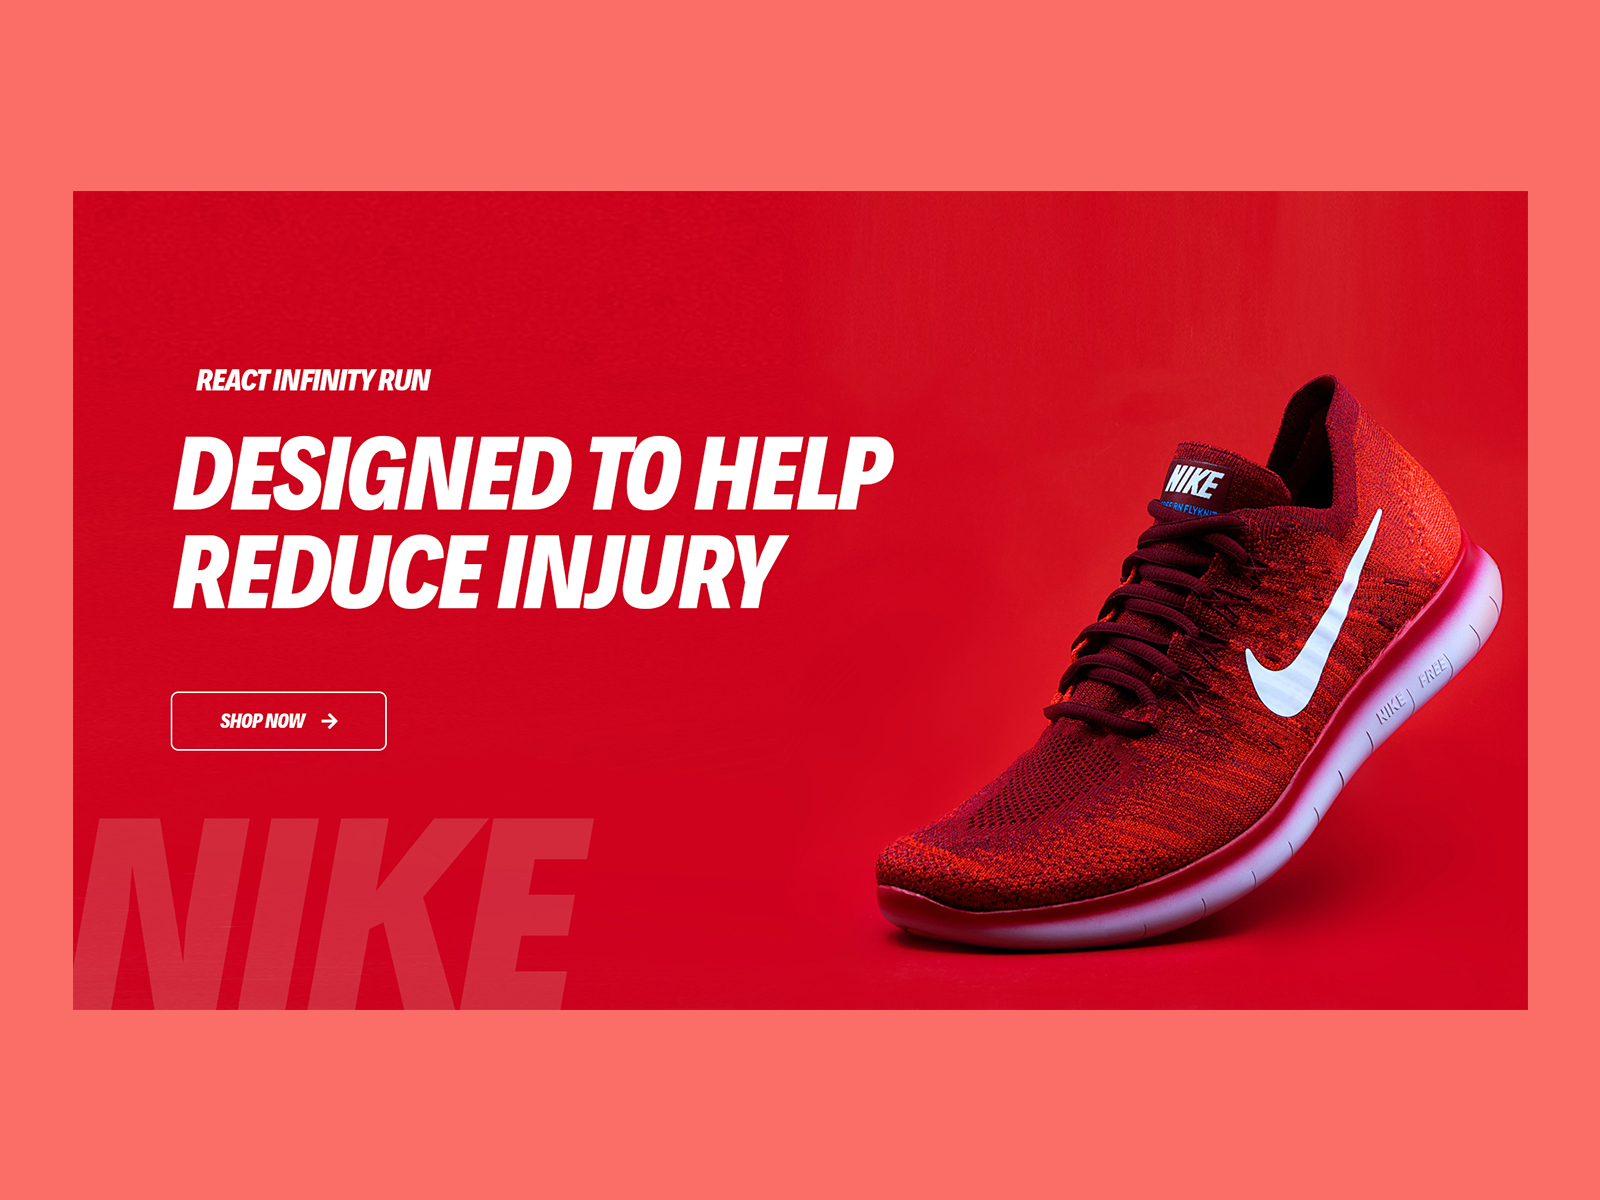 Psychologisch Induceren Buitensporig NIKE Banner by Shahzaib Yaqub on Dribbble